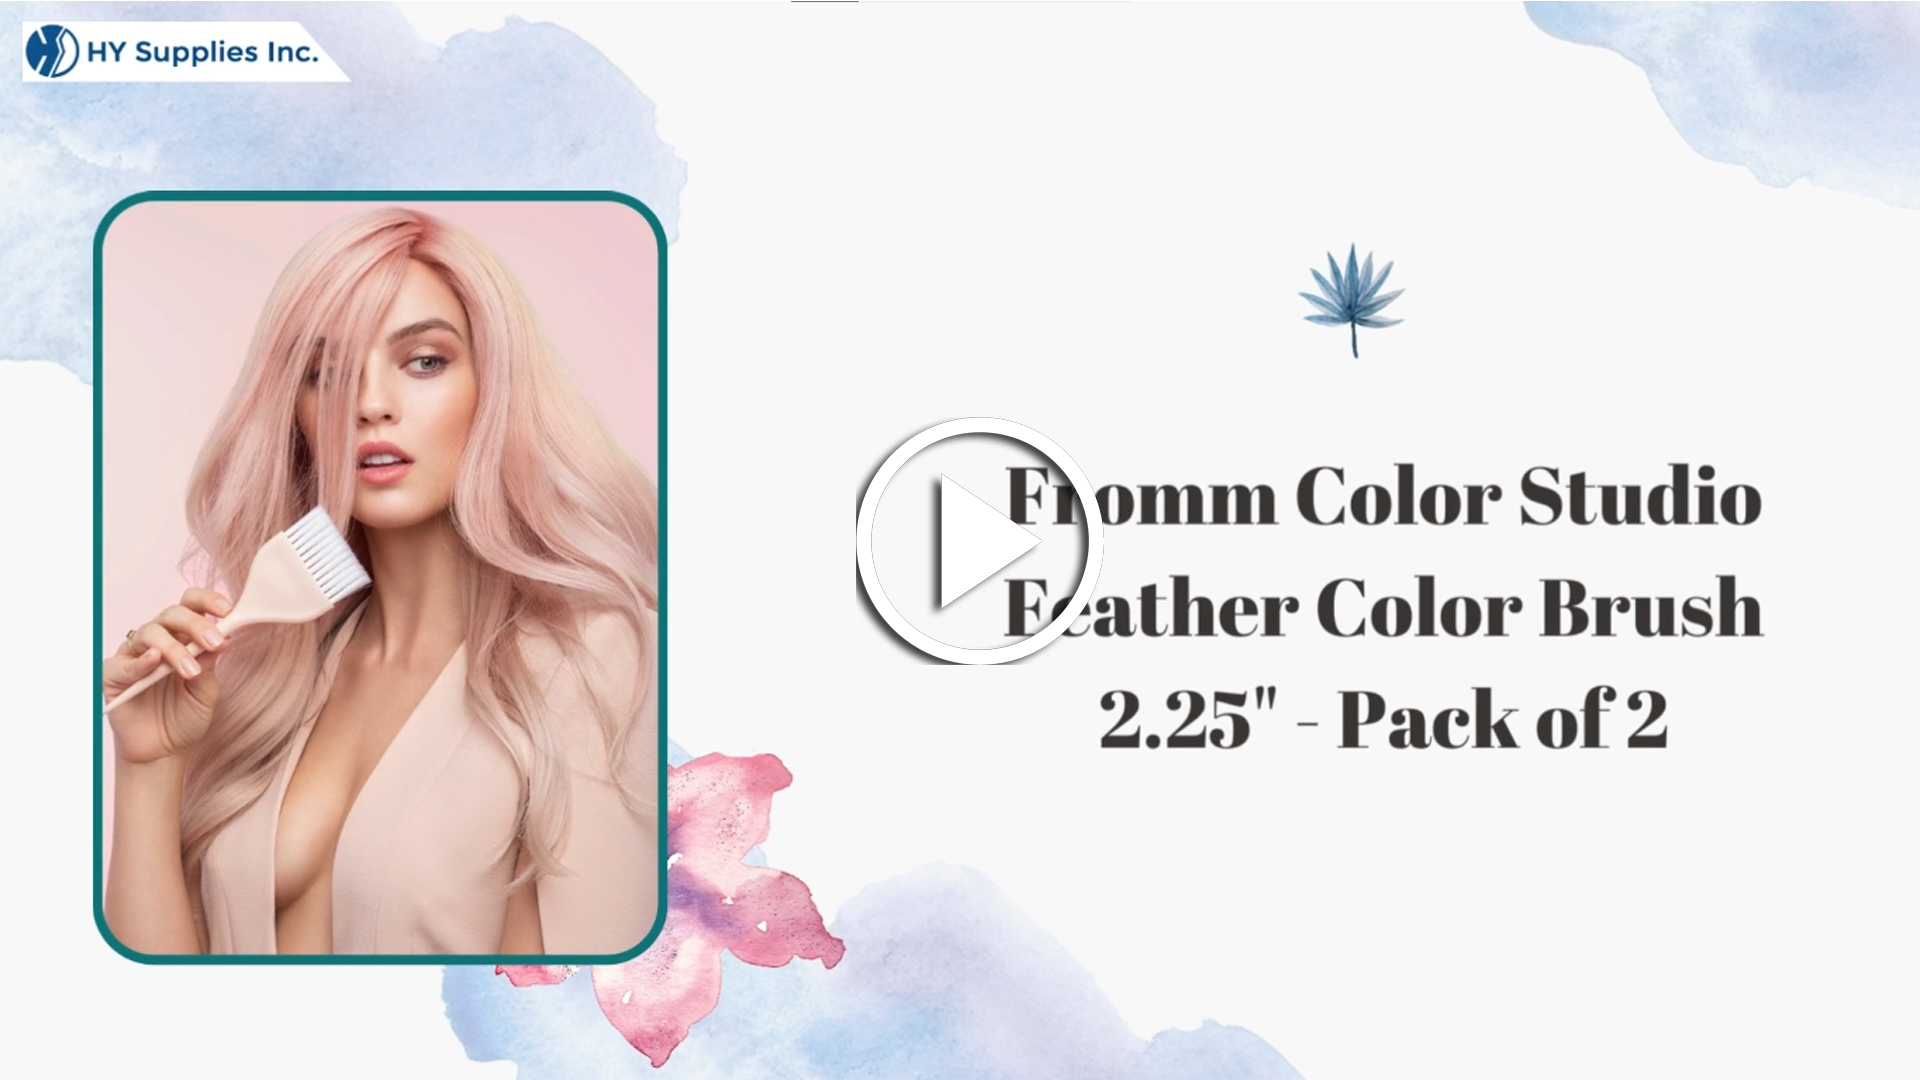 Fromm Color Studio Feather Color Brush 2.25" - Pack of 2